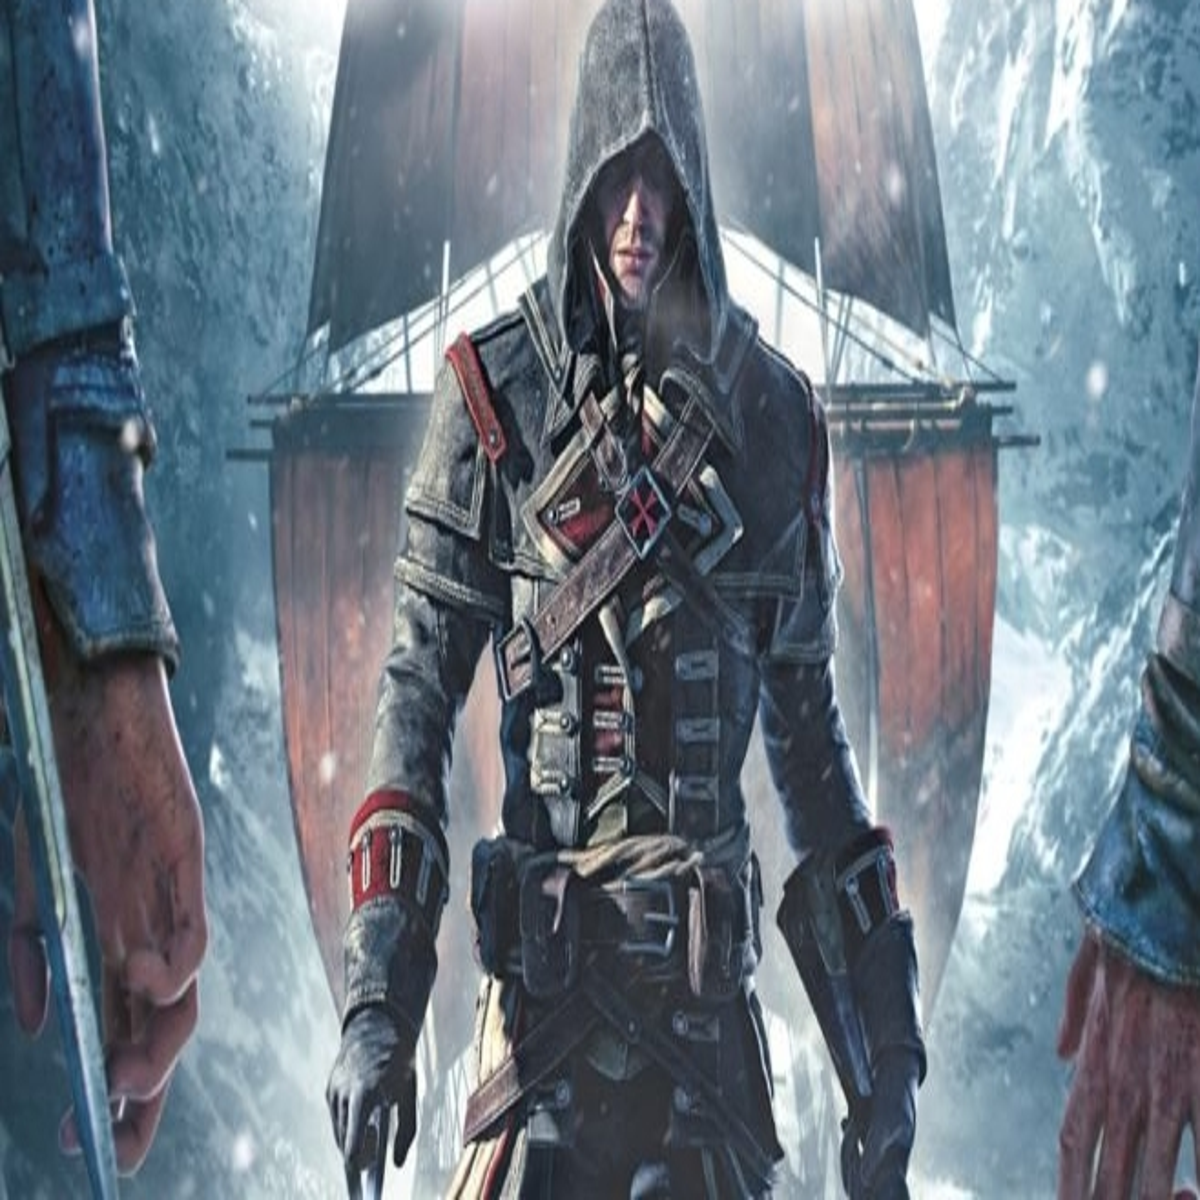 ASSASSIN'S CREED ROGUE Remastered Trailer (2018) PS4 / Xbox One 